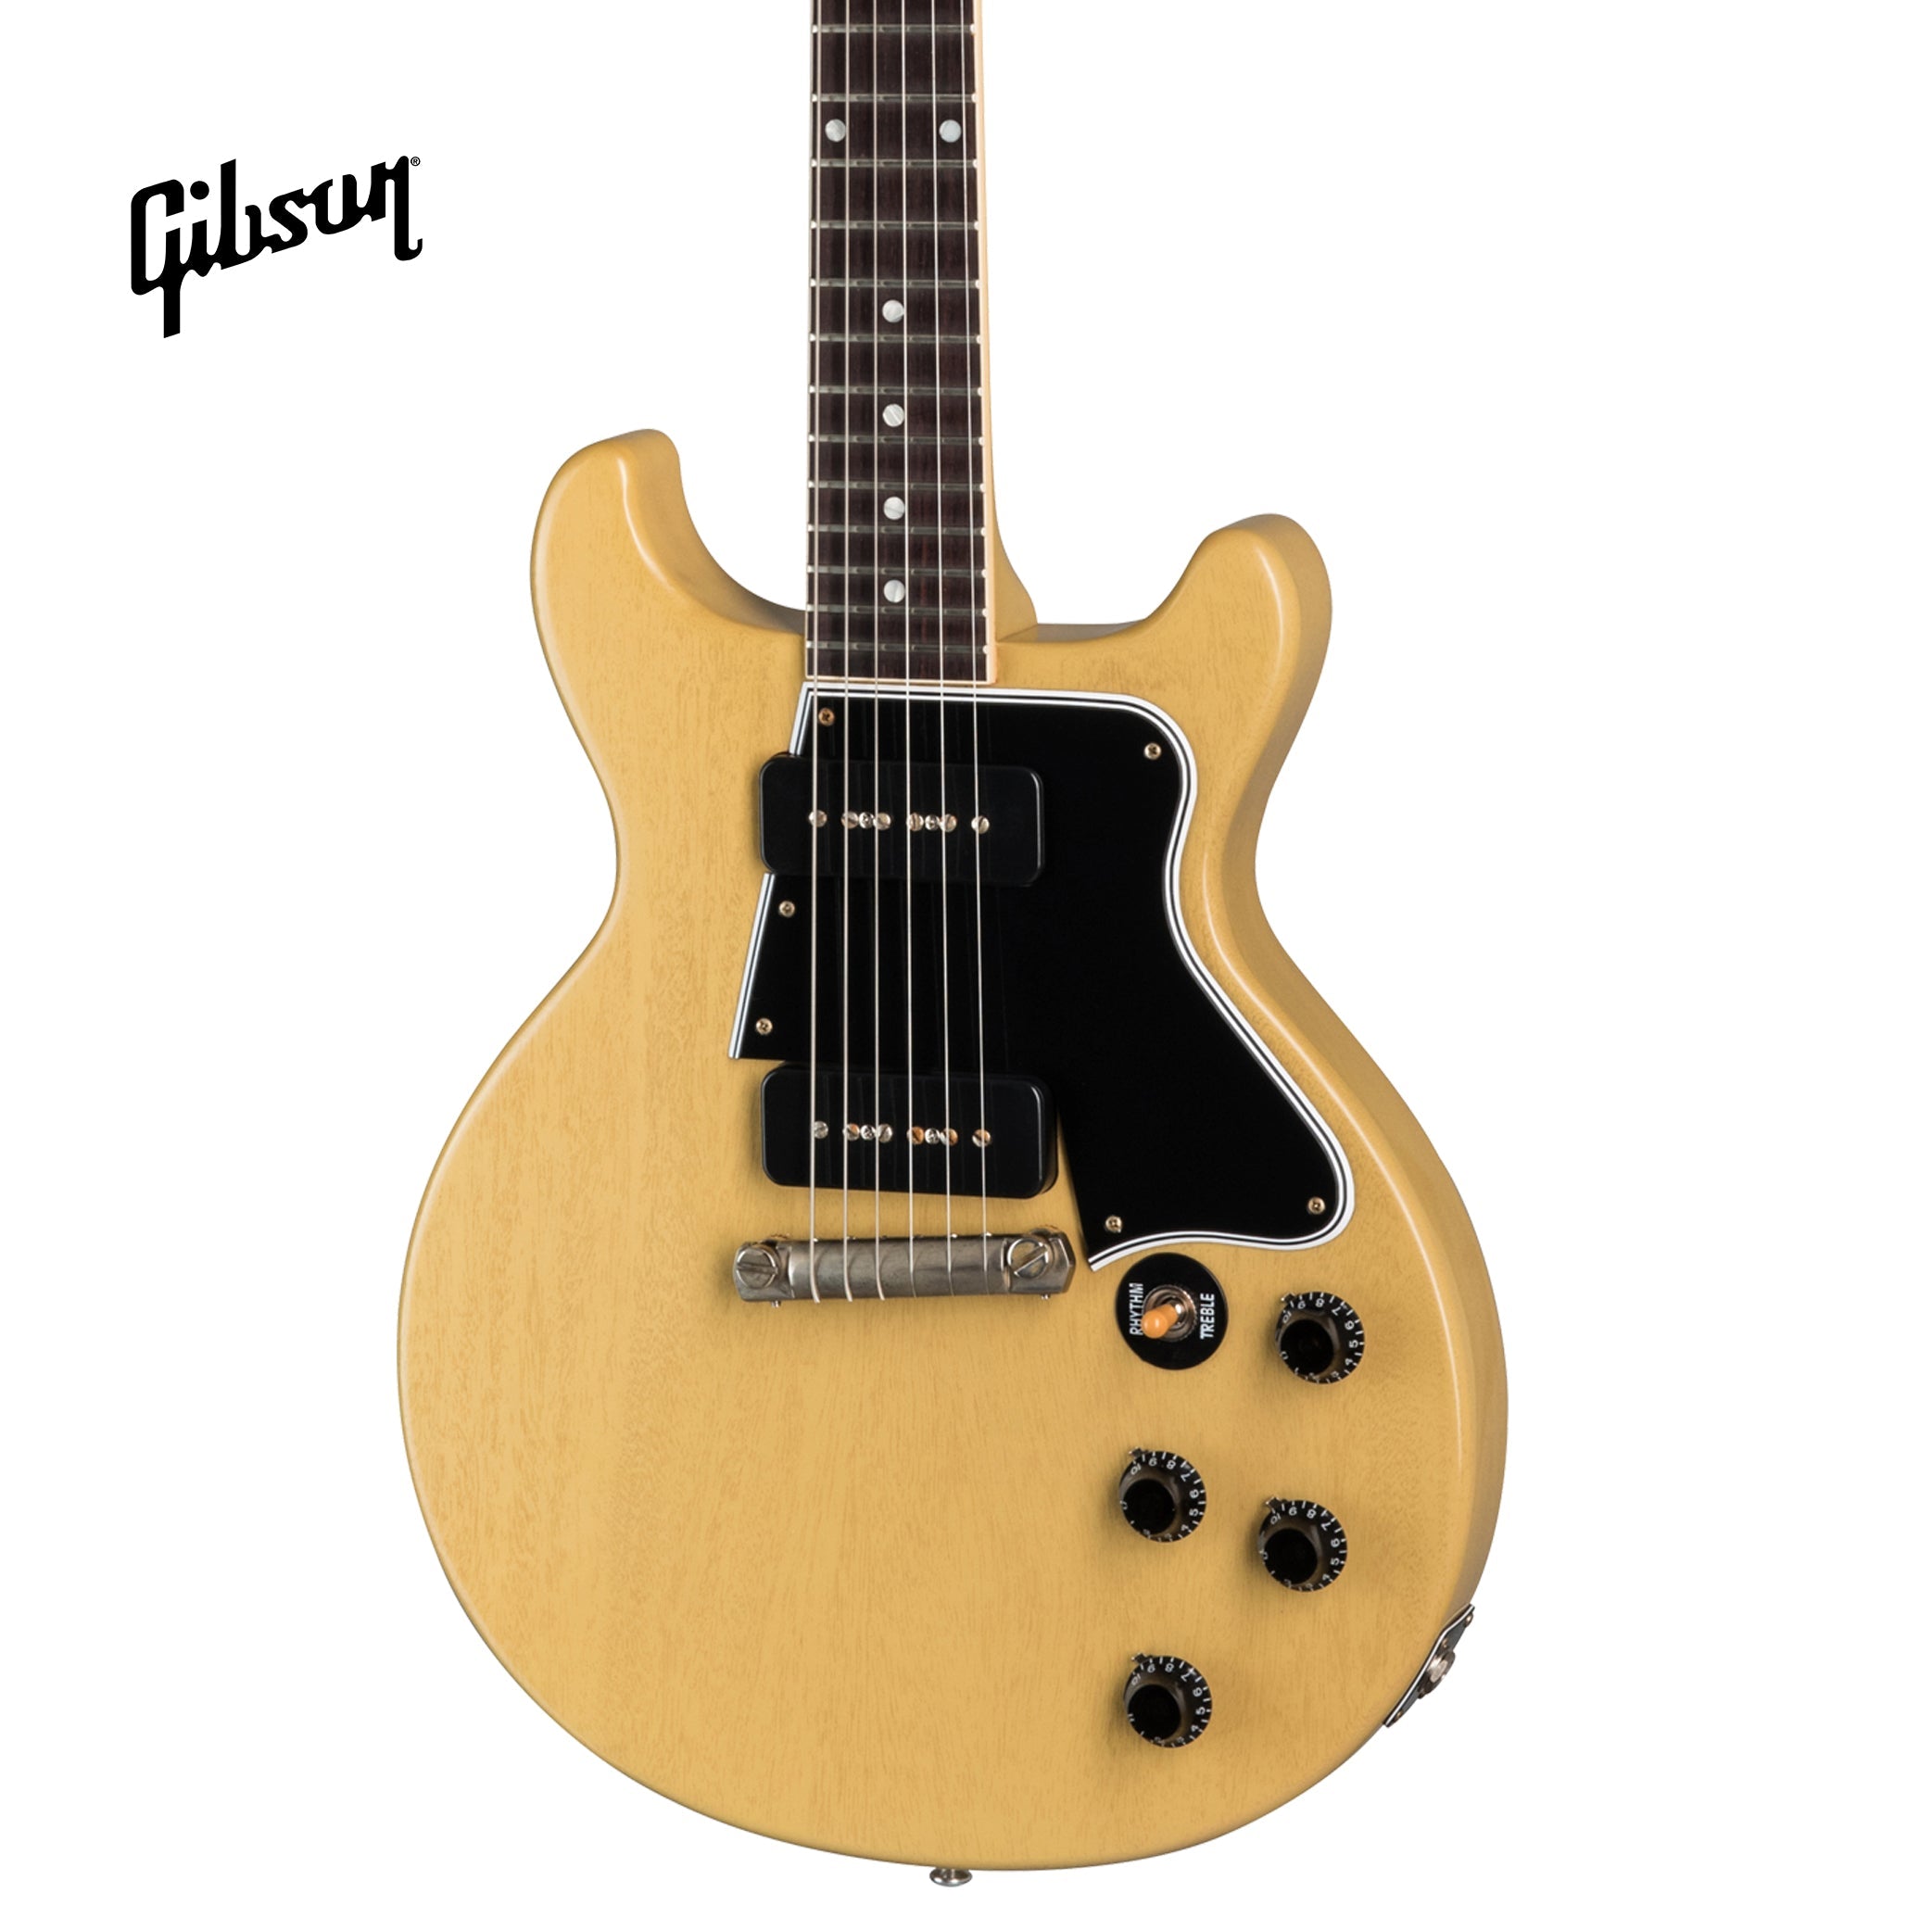 GIBSON 1960 LES PAUL SPECIAL DOUBLE CUT REISSUE VOS ELECTRIC GUITAR - TV YELLOW